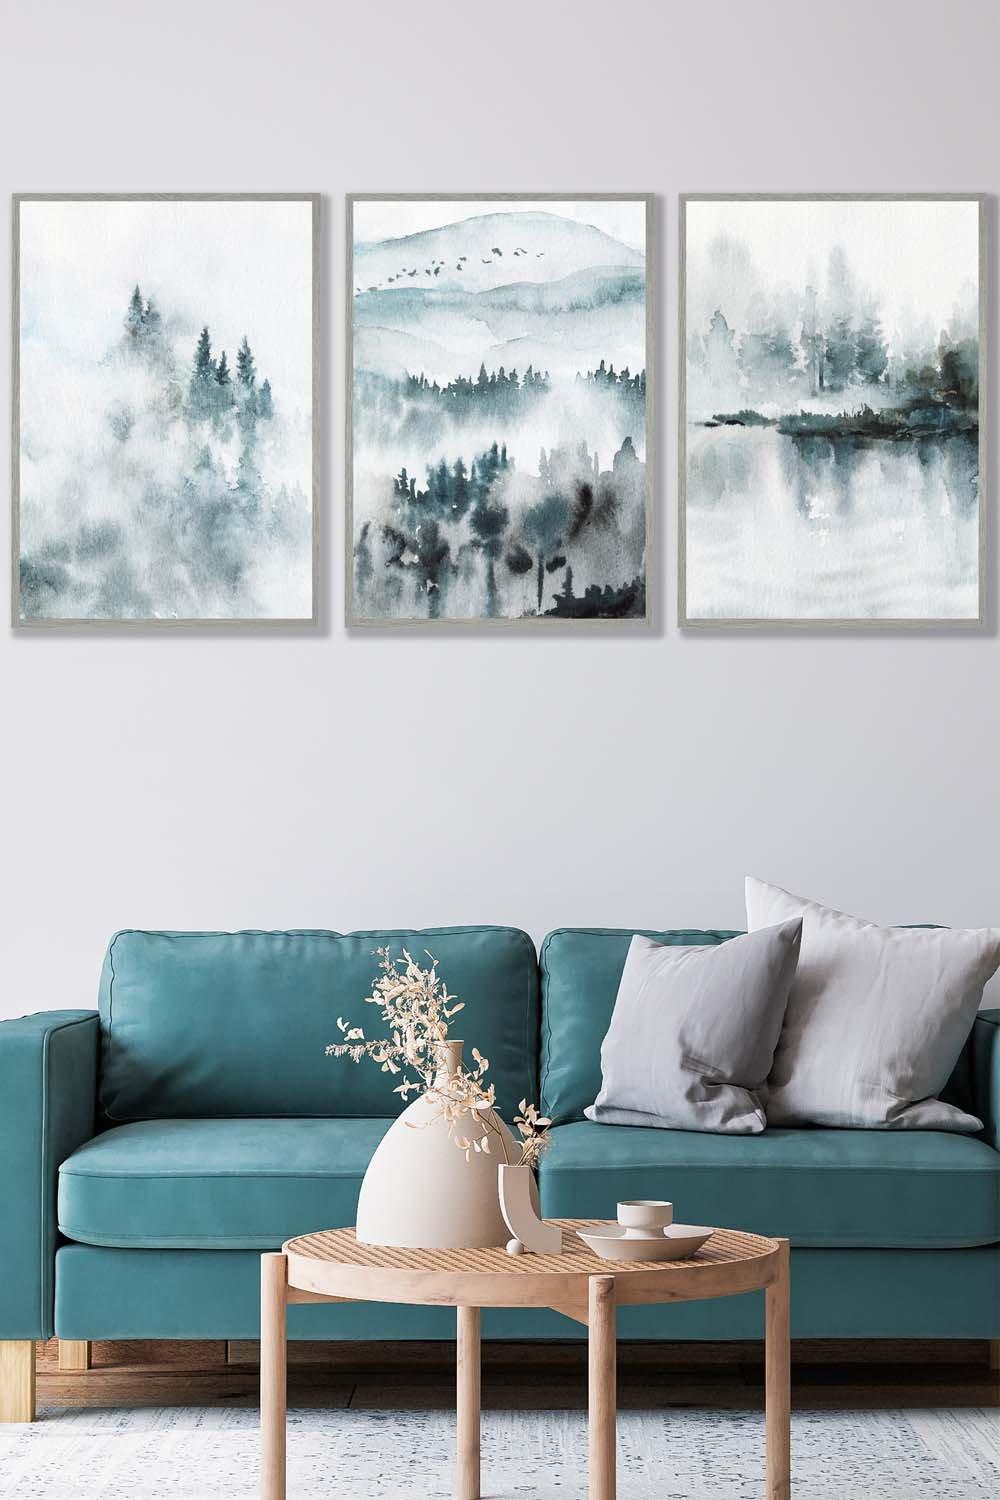 Set of 3 Light Grey Framed Teal Blue Abstract Forest Lake Wall Art